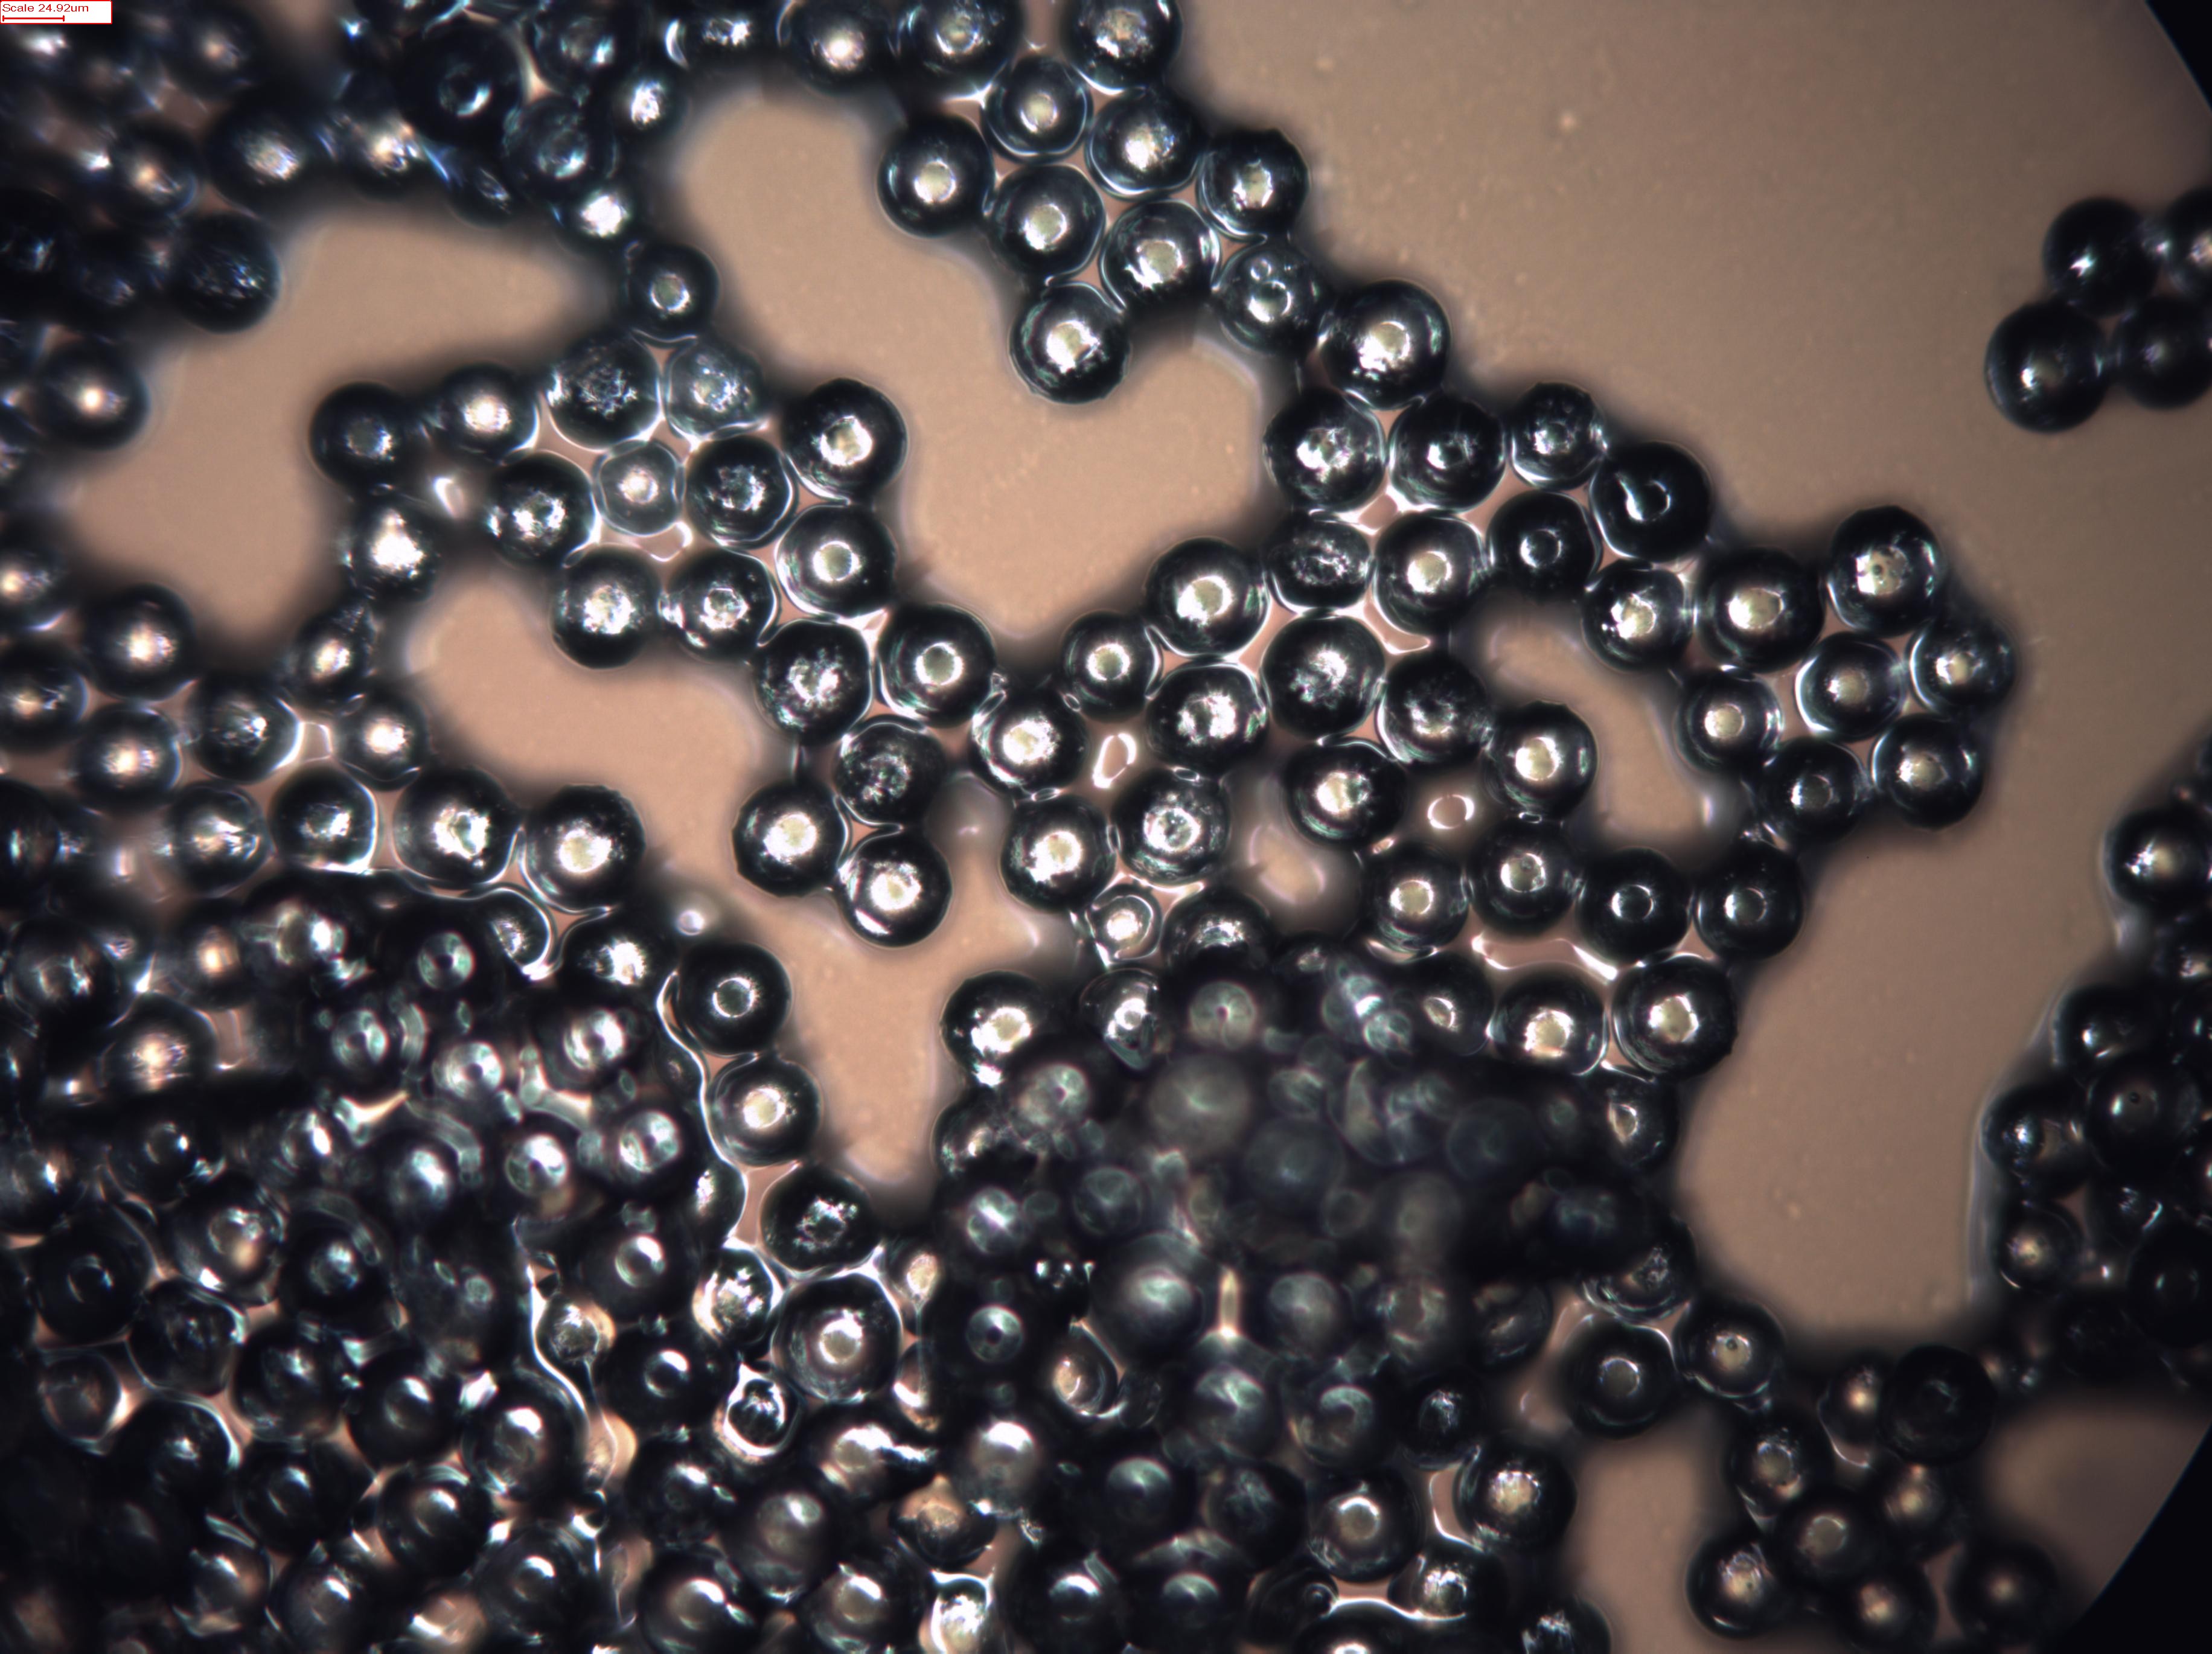 Black Paramagnetic Coated Glass Microspheres - Various sizes and densities Black Paramagnetic glass, glass spheres, microspheres, particles, microparticles, beads